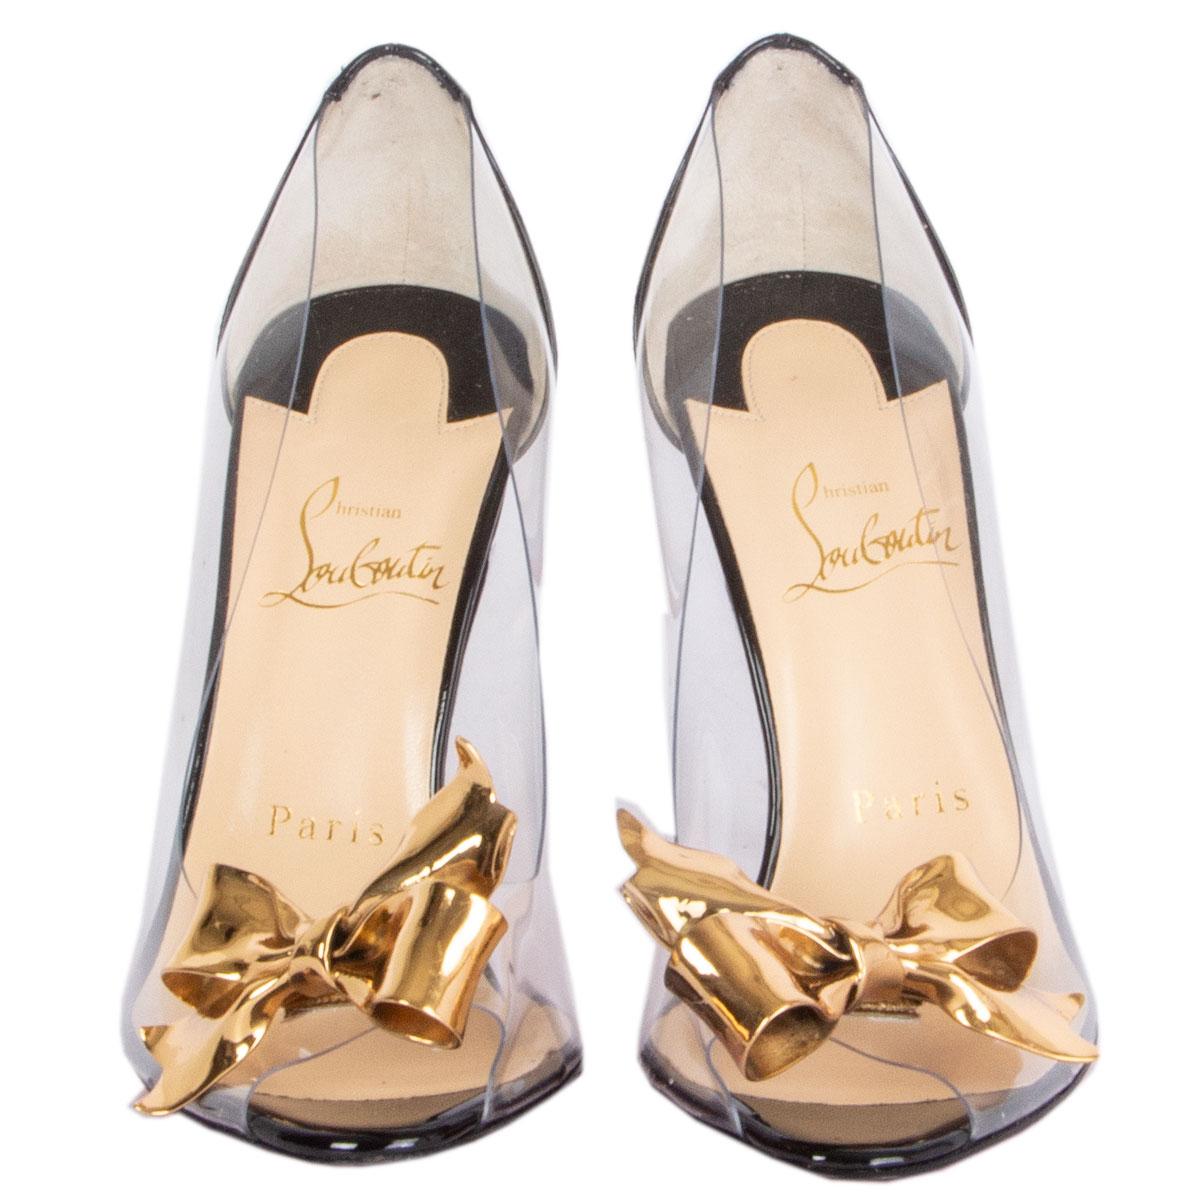 100% authentic Christian Louboutin Justinodo open-toe pumps in clear pvc and black patent leather featuring gold-tone metal bow embellishment. Brand new. 

Imprinted Size 36.5
Shoe Size 36.5
Inside Sole 23cm (9in)
Width 7cm (2.7in)
Heel 10cm